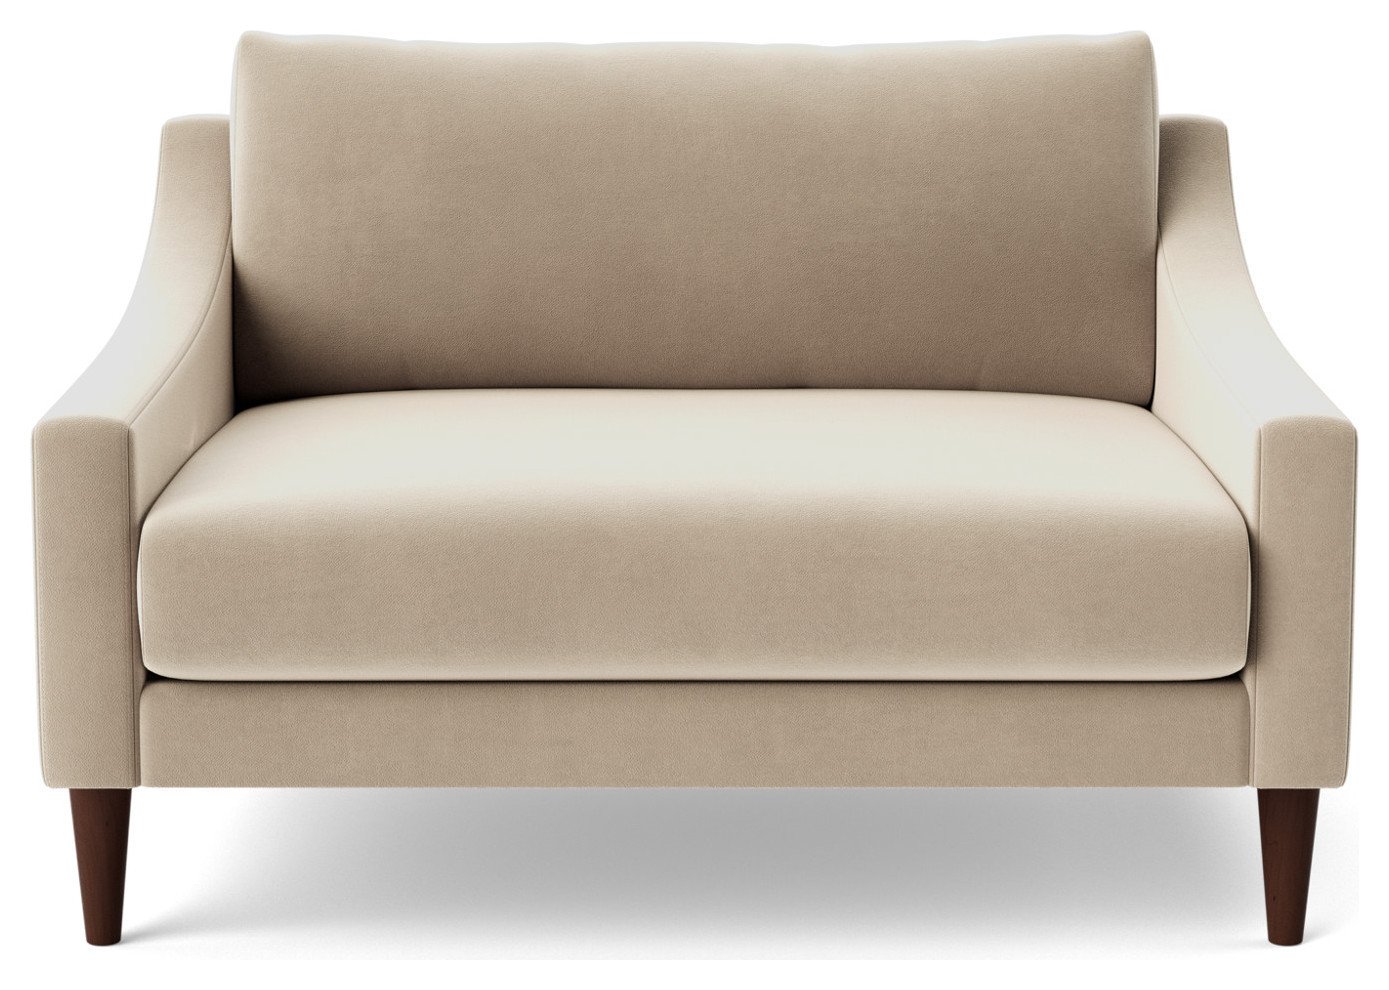 Swoon Turin Velvet Cuddle Chair - Taupe